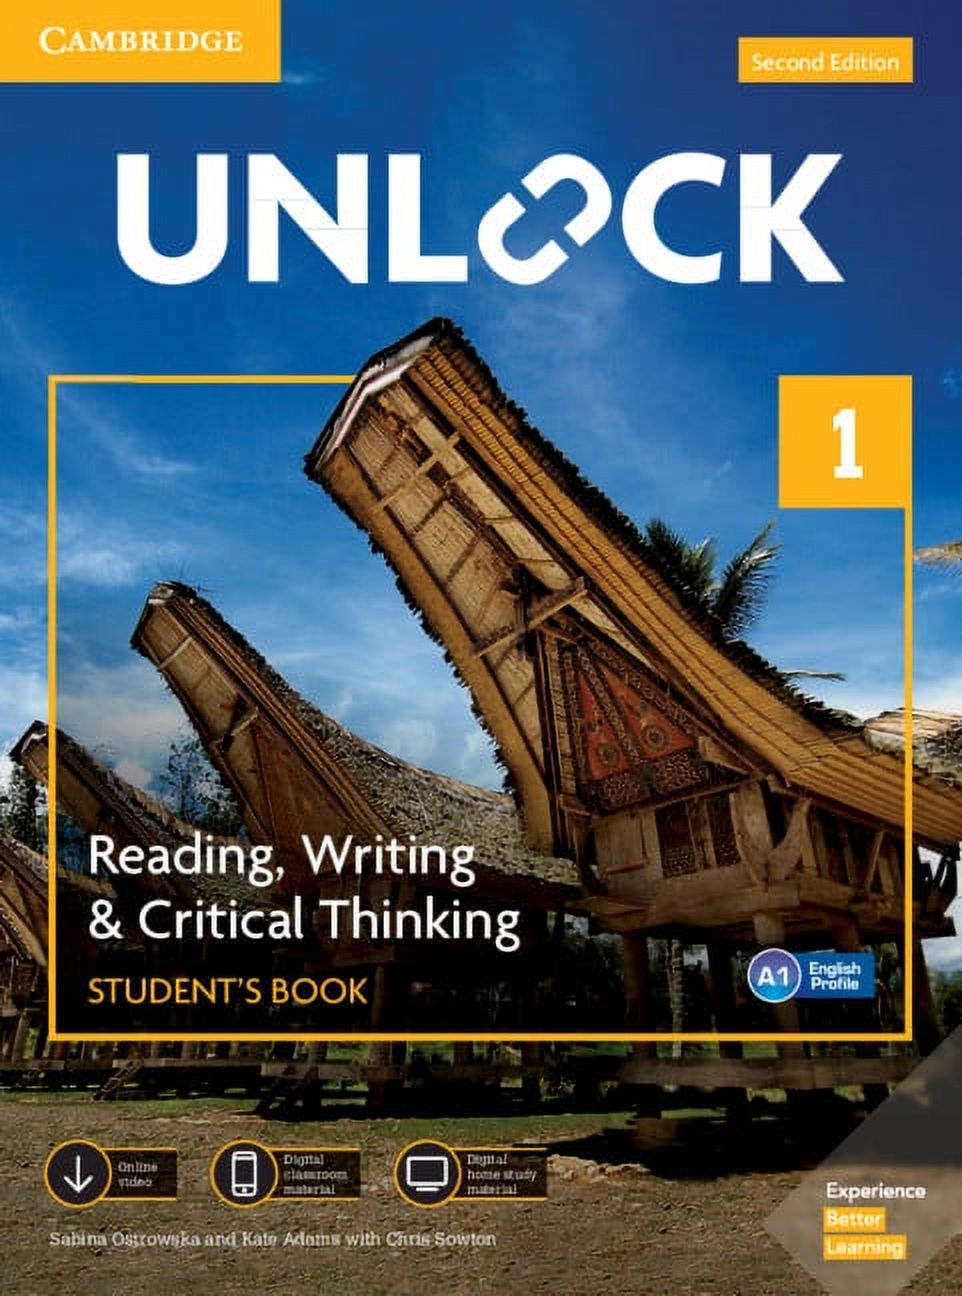 Level　Workbook　W/　Online　Mob　Book,　and　Unlock　App　Writing,　Student's　Reading,　Thinking　Critical　Unlock:　(Other)　Downloadable　Video